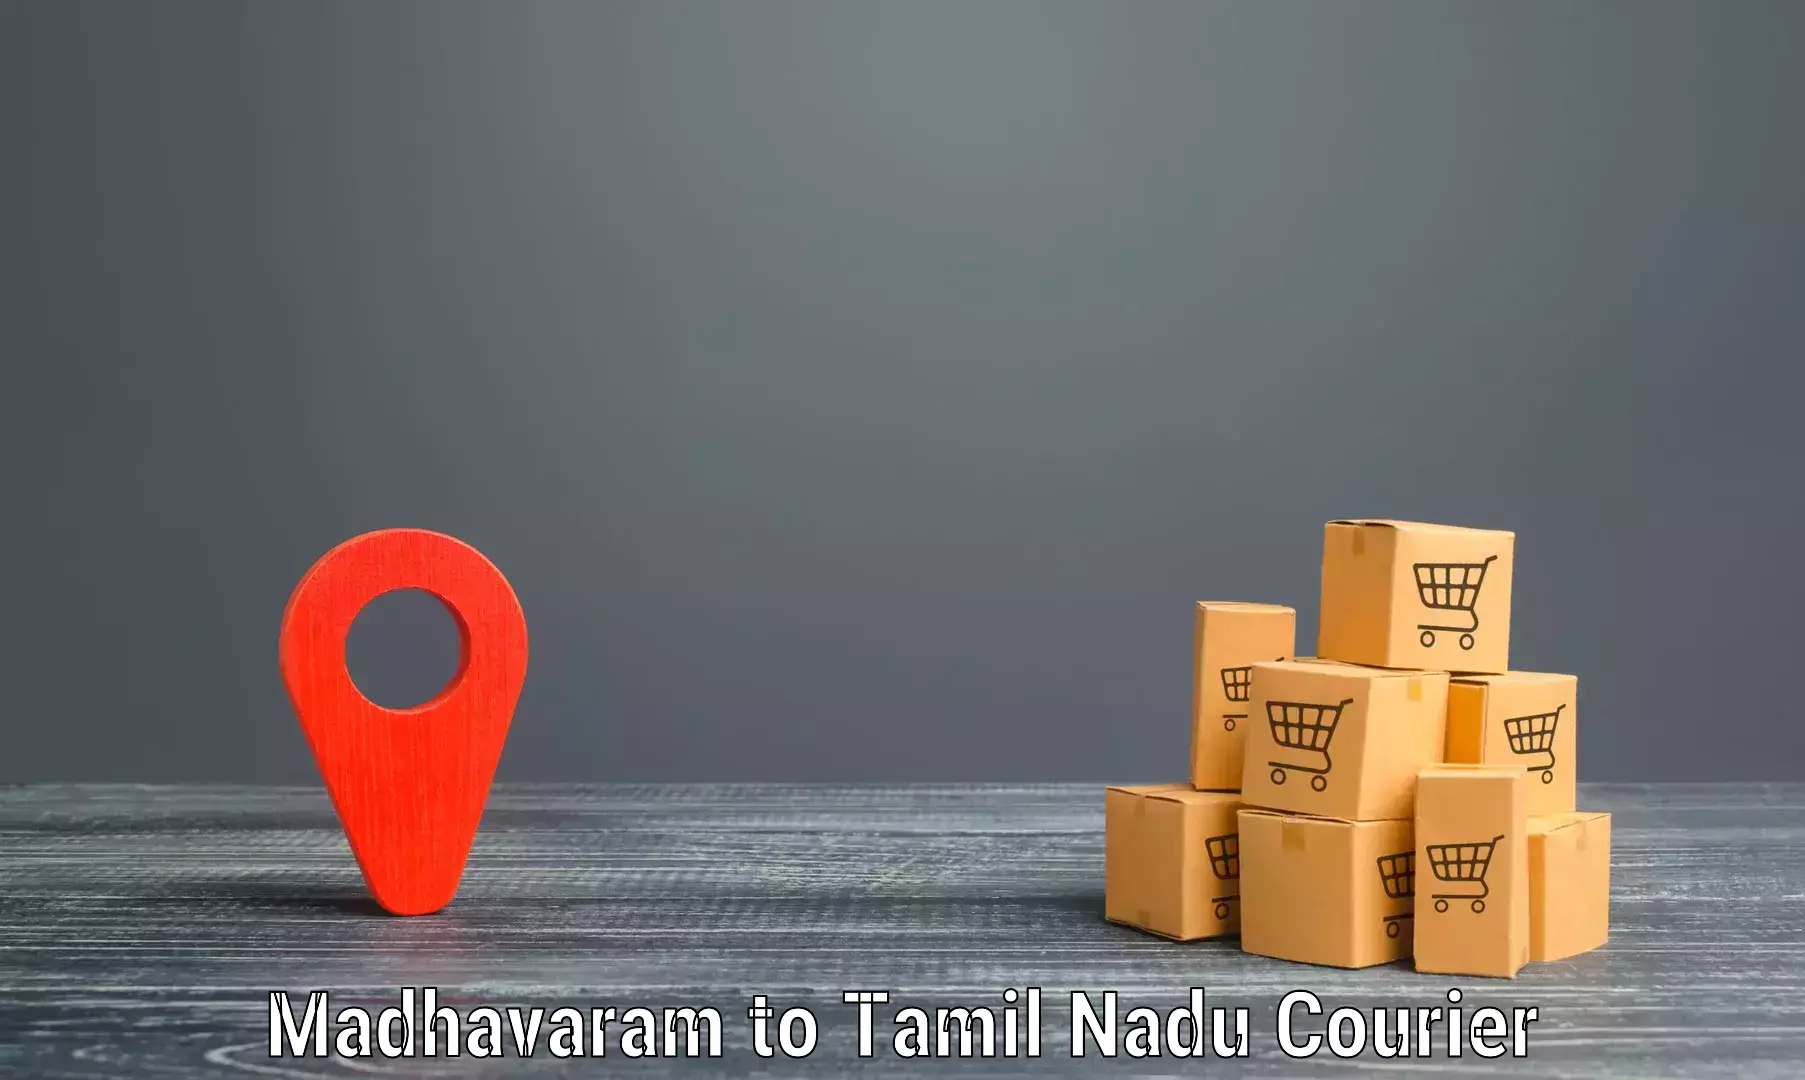 Express delivery capabilities in Madhavaram to Salem